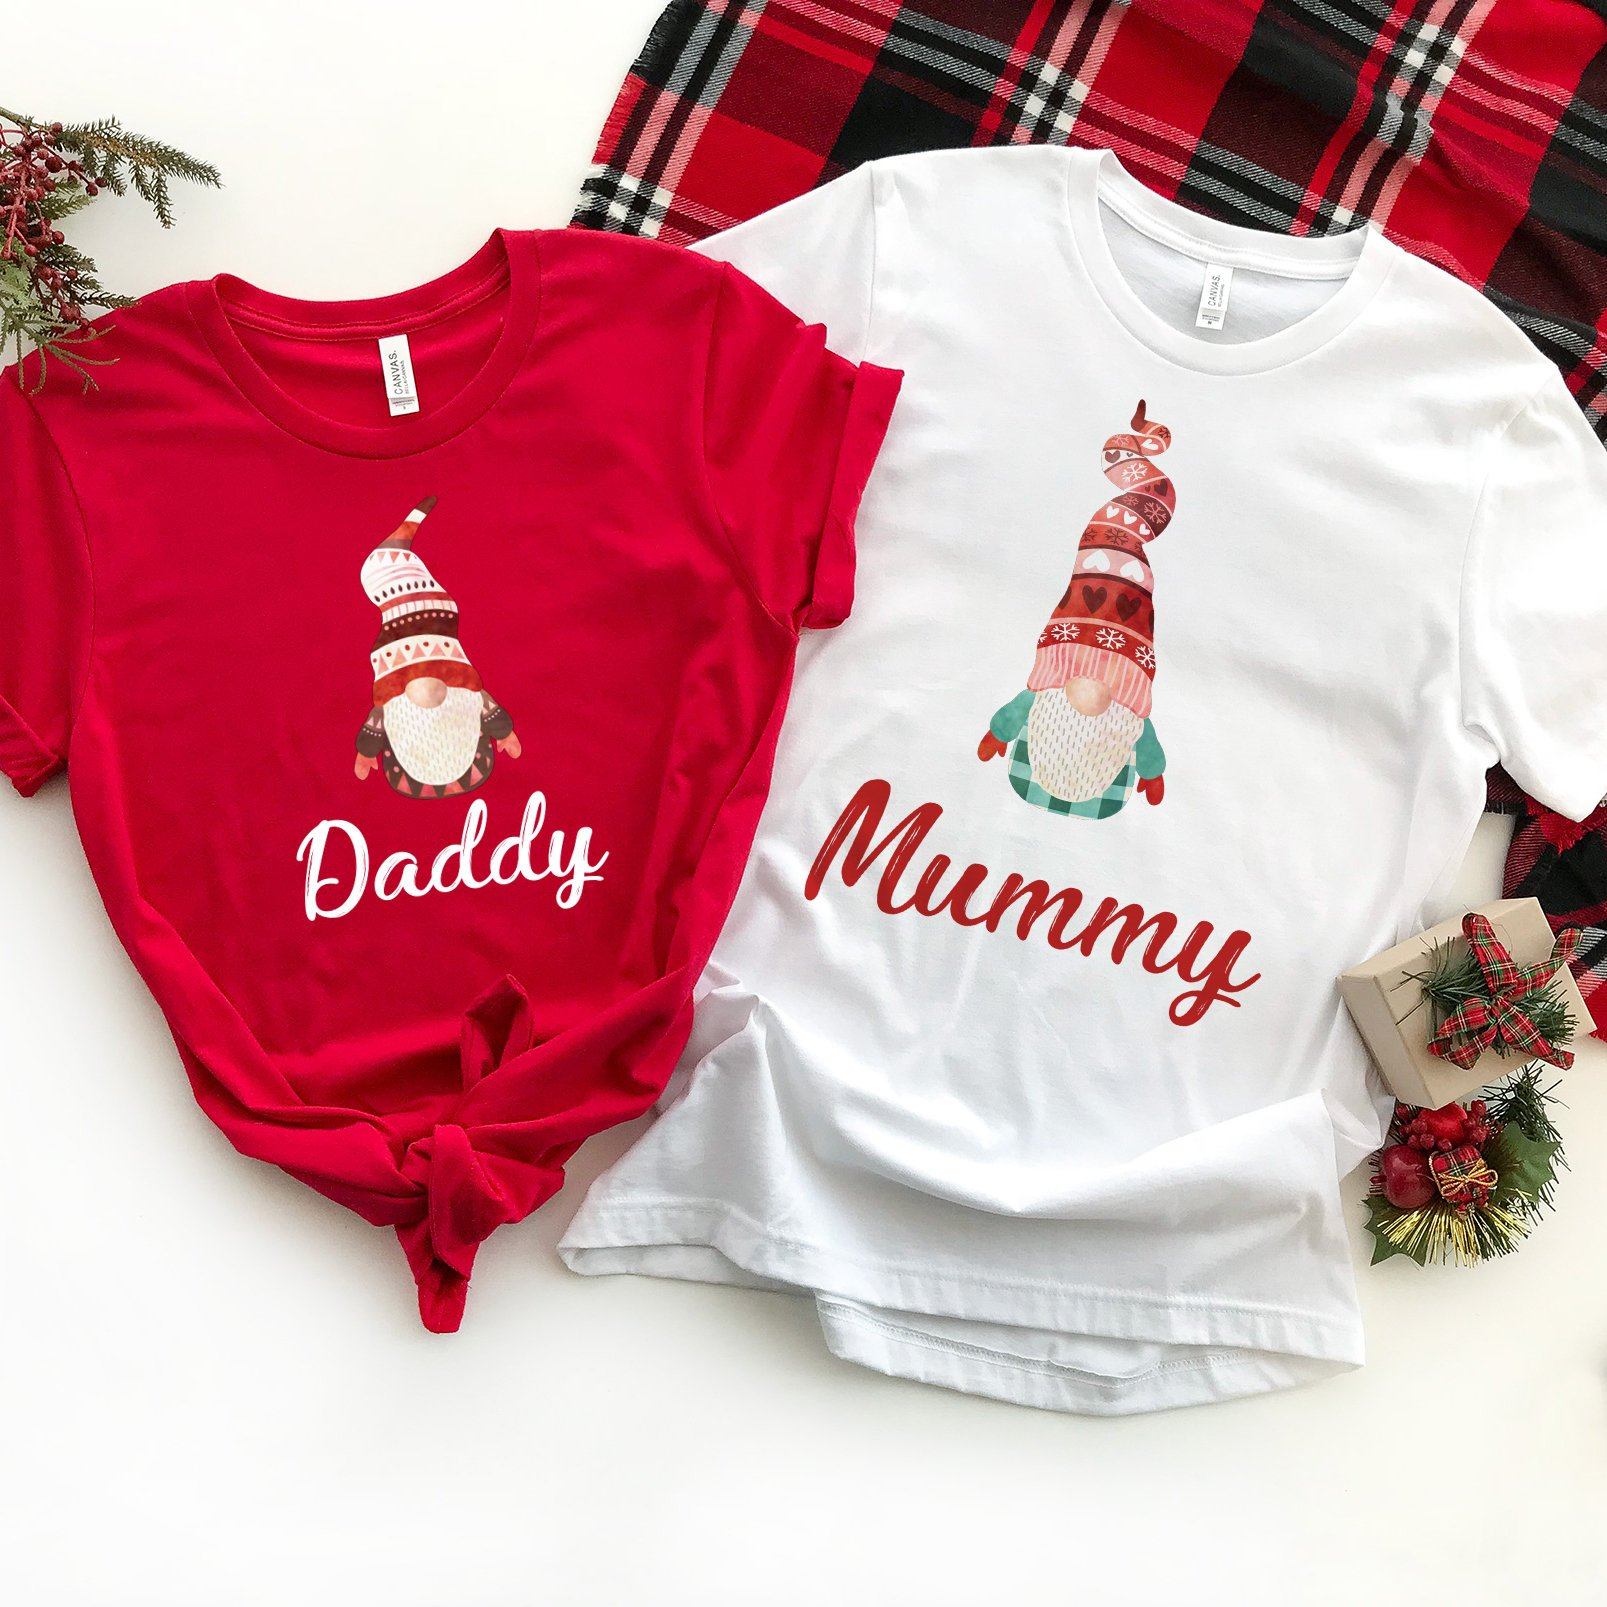 Personalised Matching gnome Christmas family t-shirts, Gift for him or her Gnomes Outfit